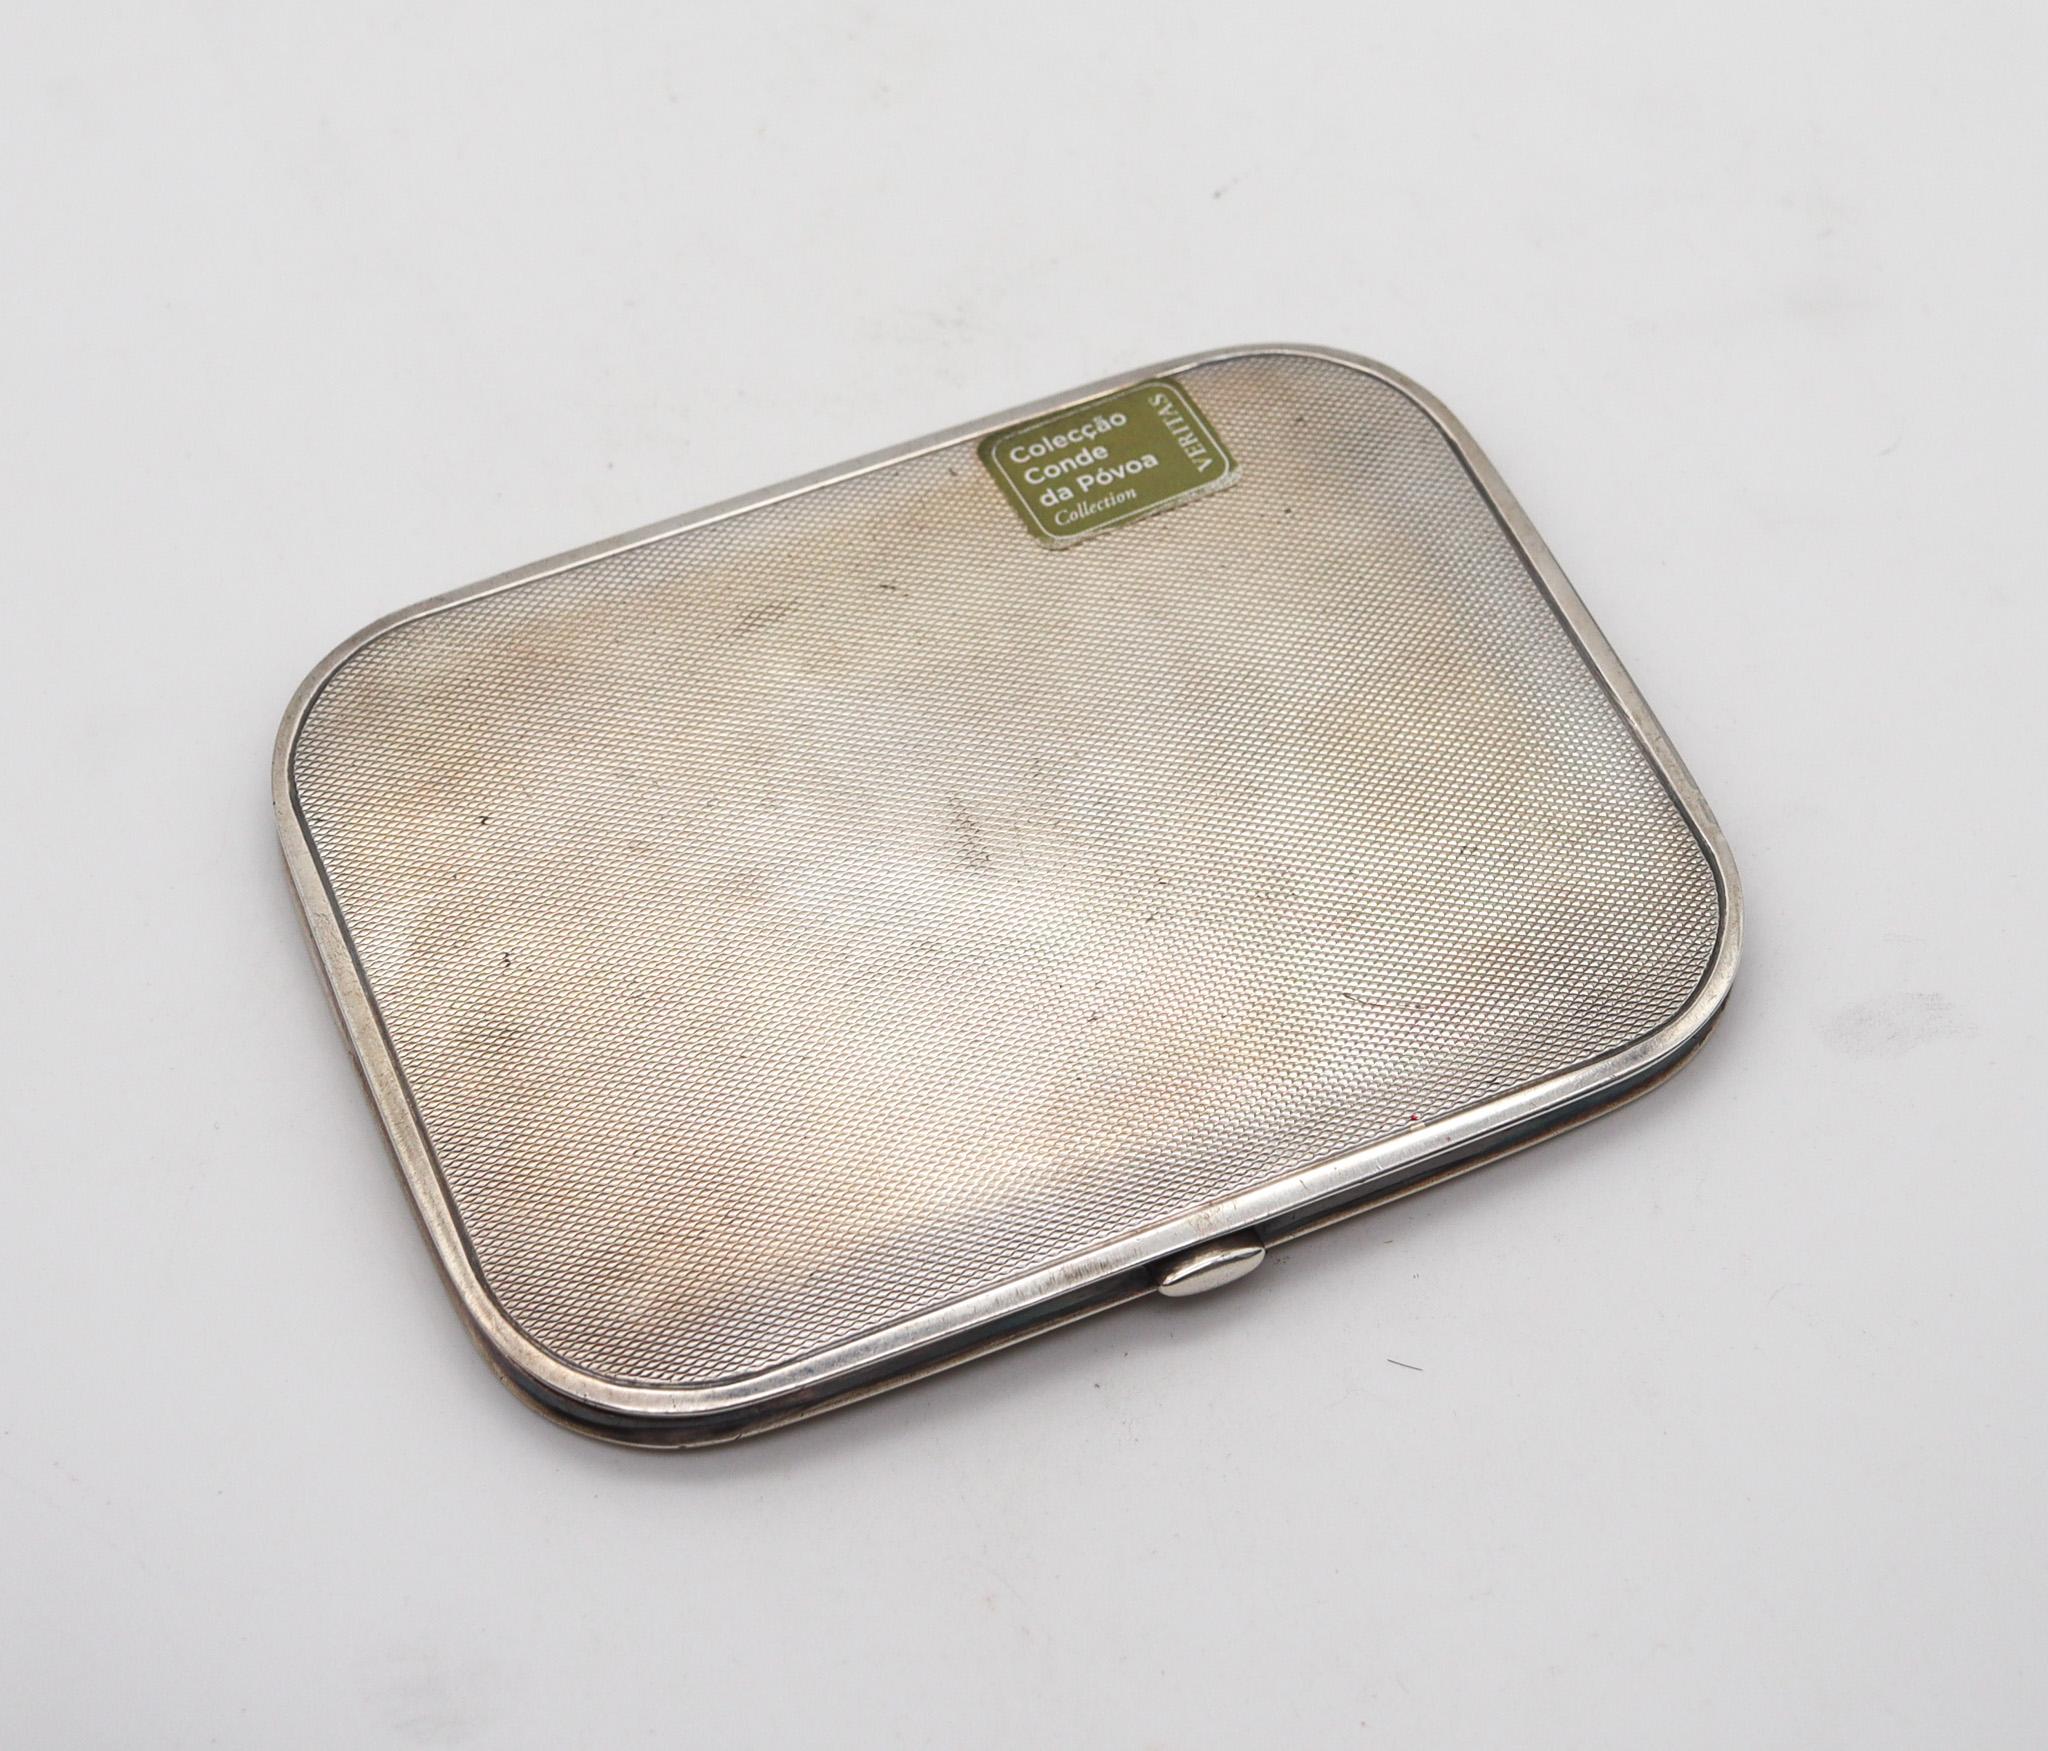 Finnigans 1932 London Art Deco Enamel Case Box With Racing Car In .925 Sterling  For Sale 2